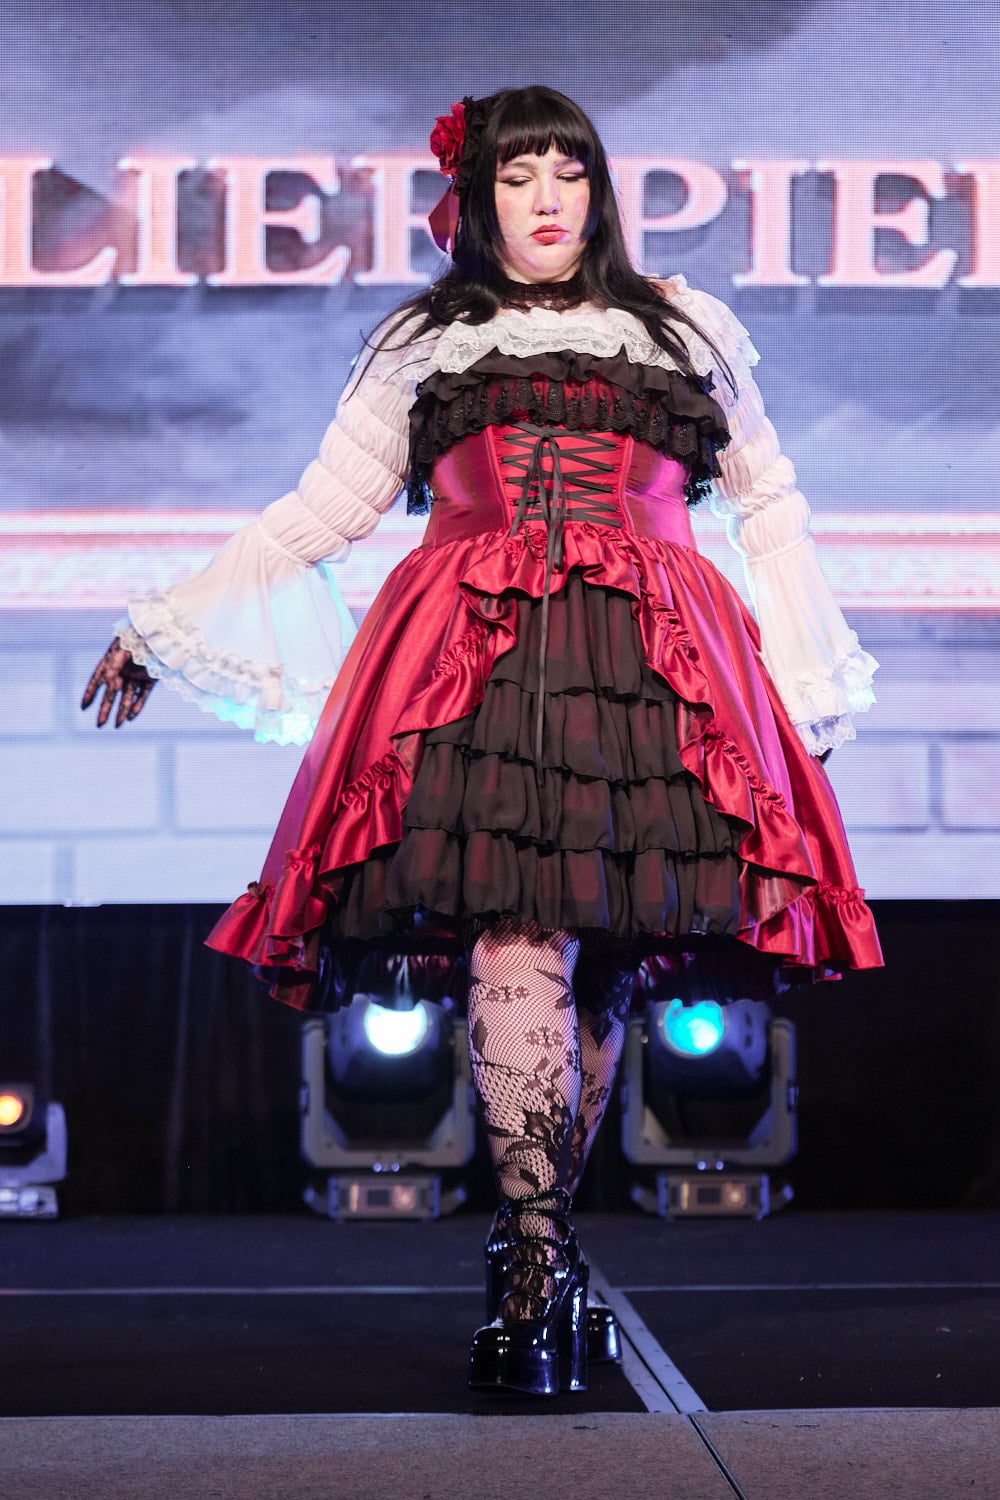 Plus size gothic lolita wearing red and black shantung bustle dress with white princess sleeve blouse, lace tights, and black shoes - full body 5.